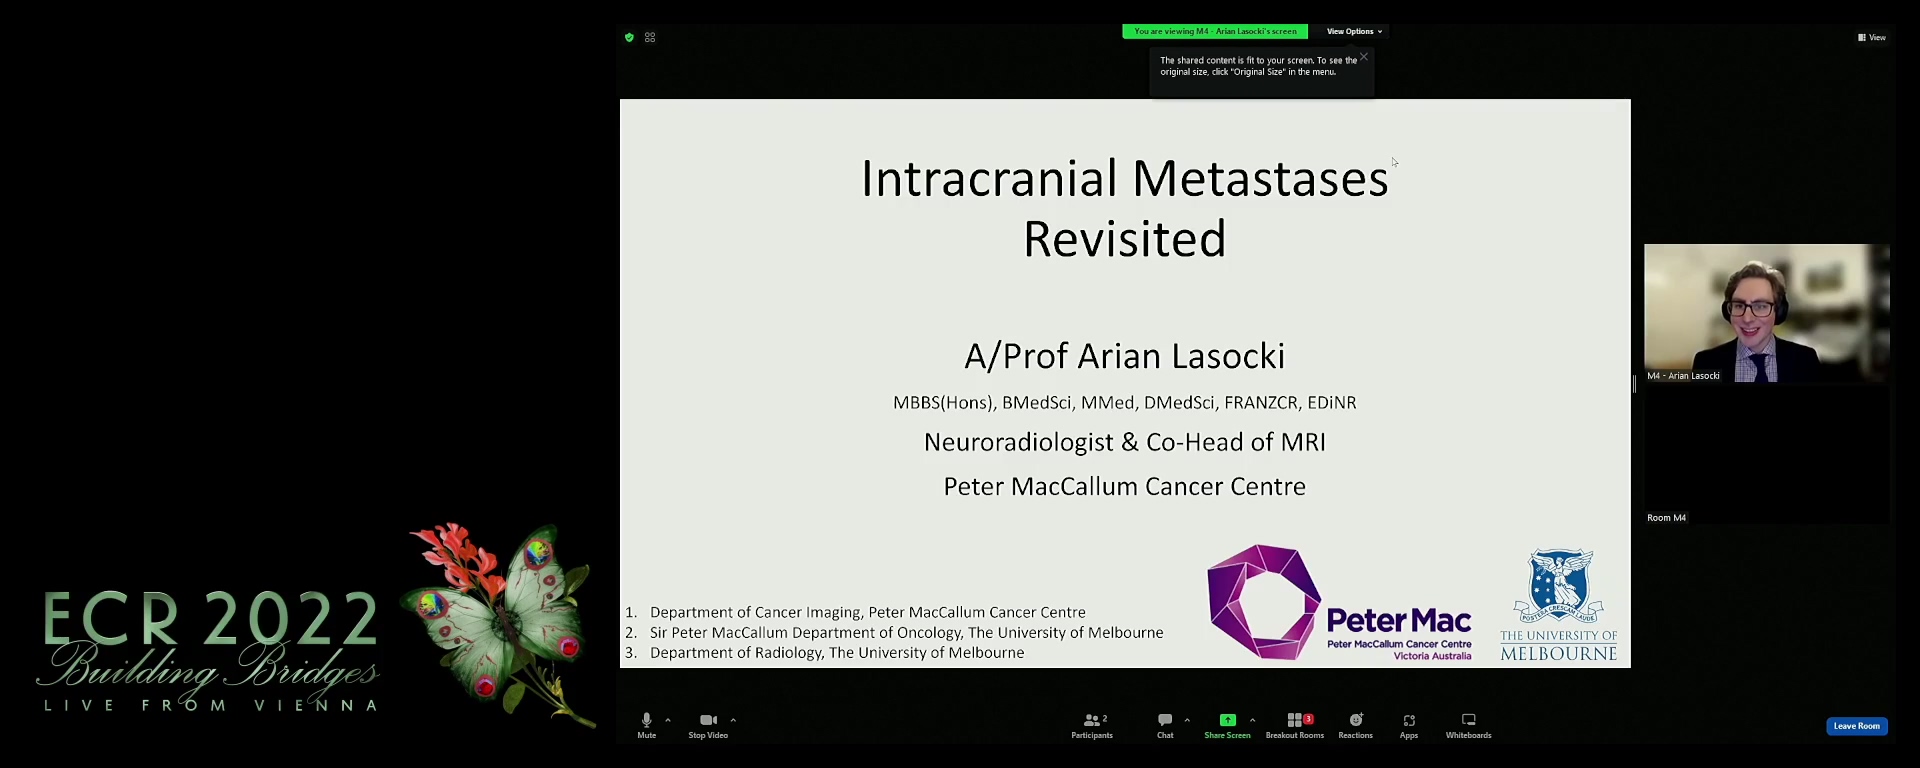 Intracranial metastases revisited